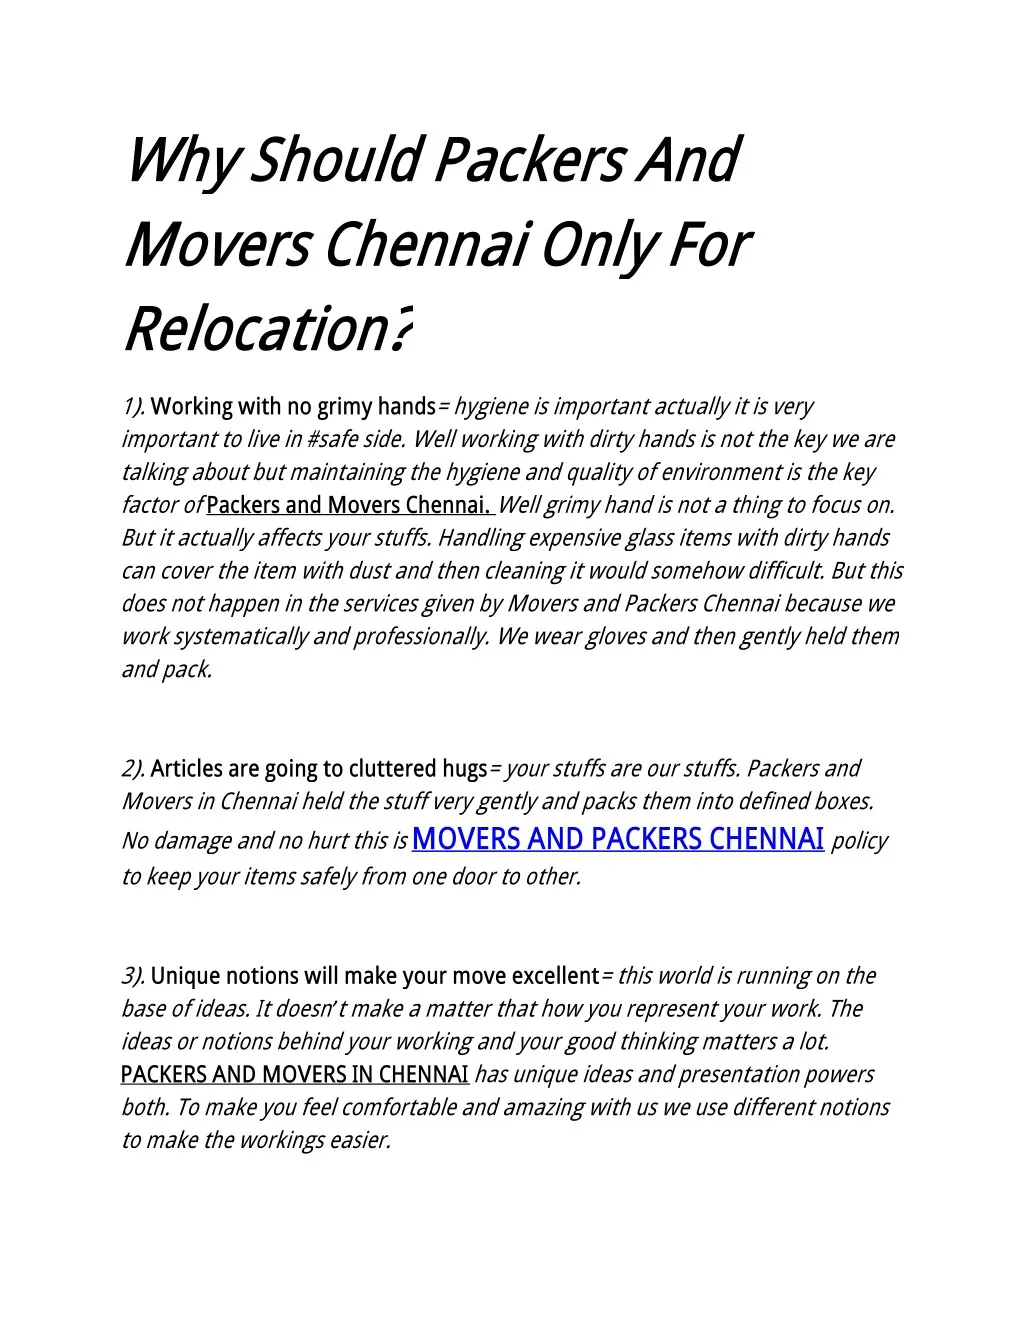 why should packers and movers chennai only